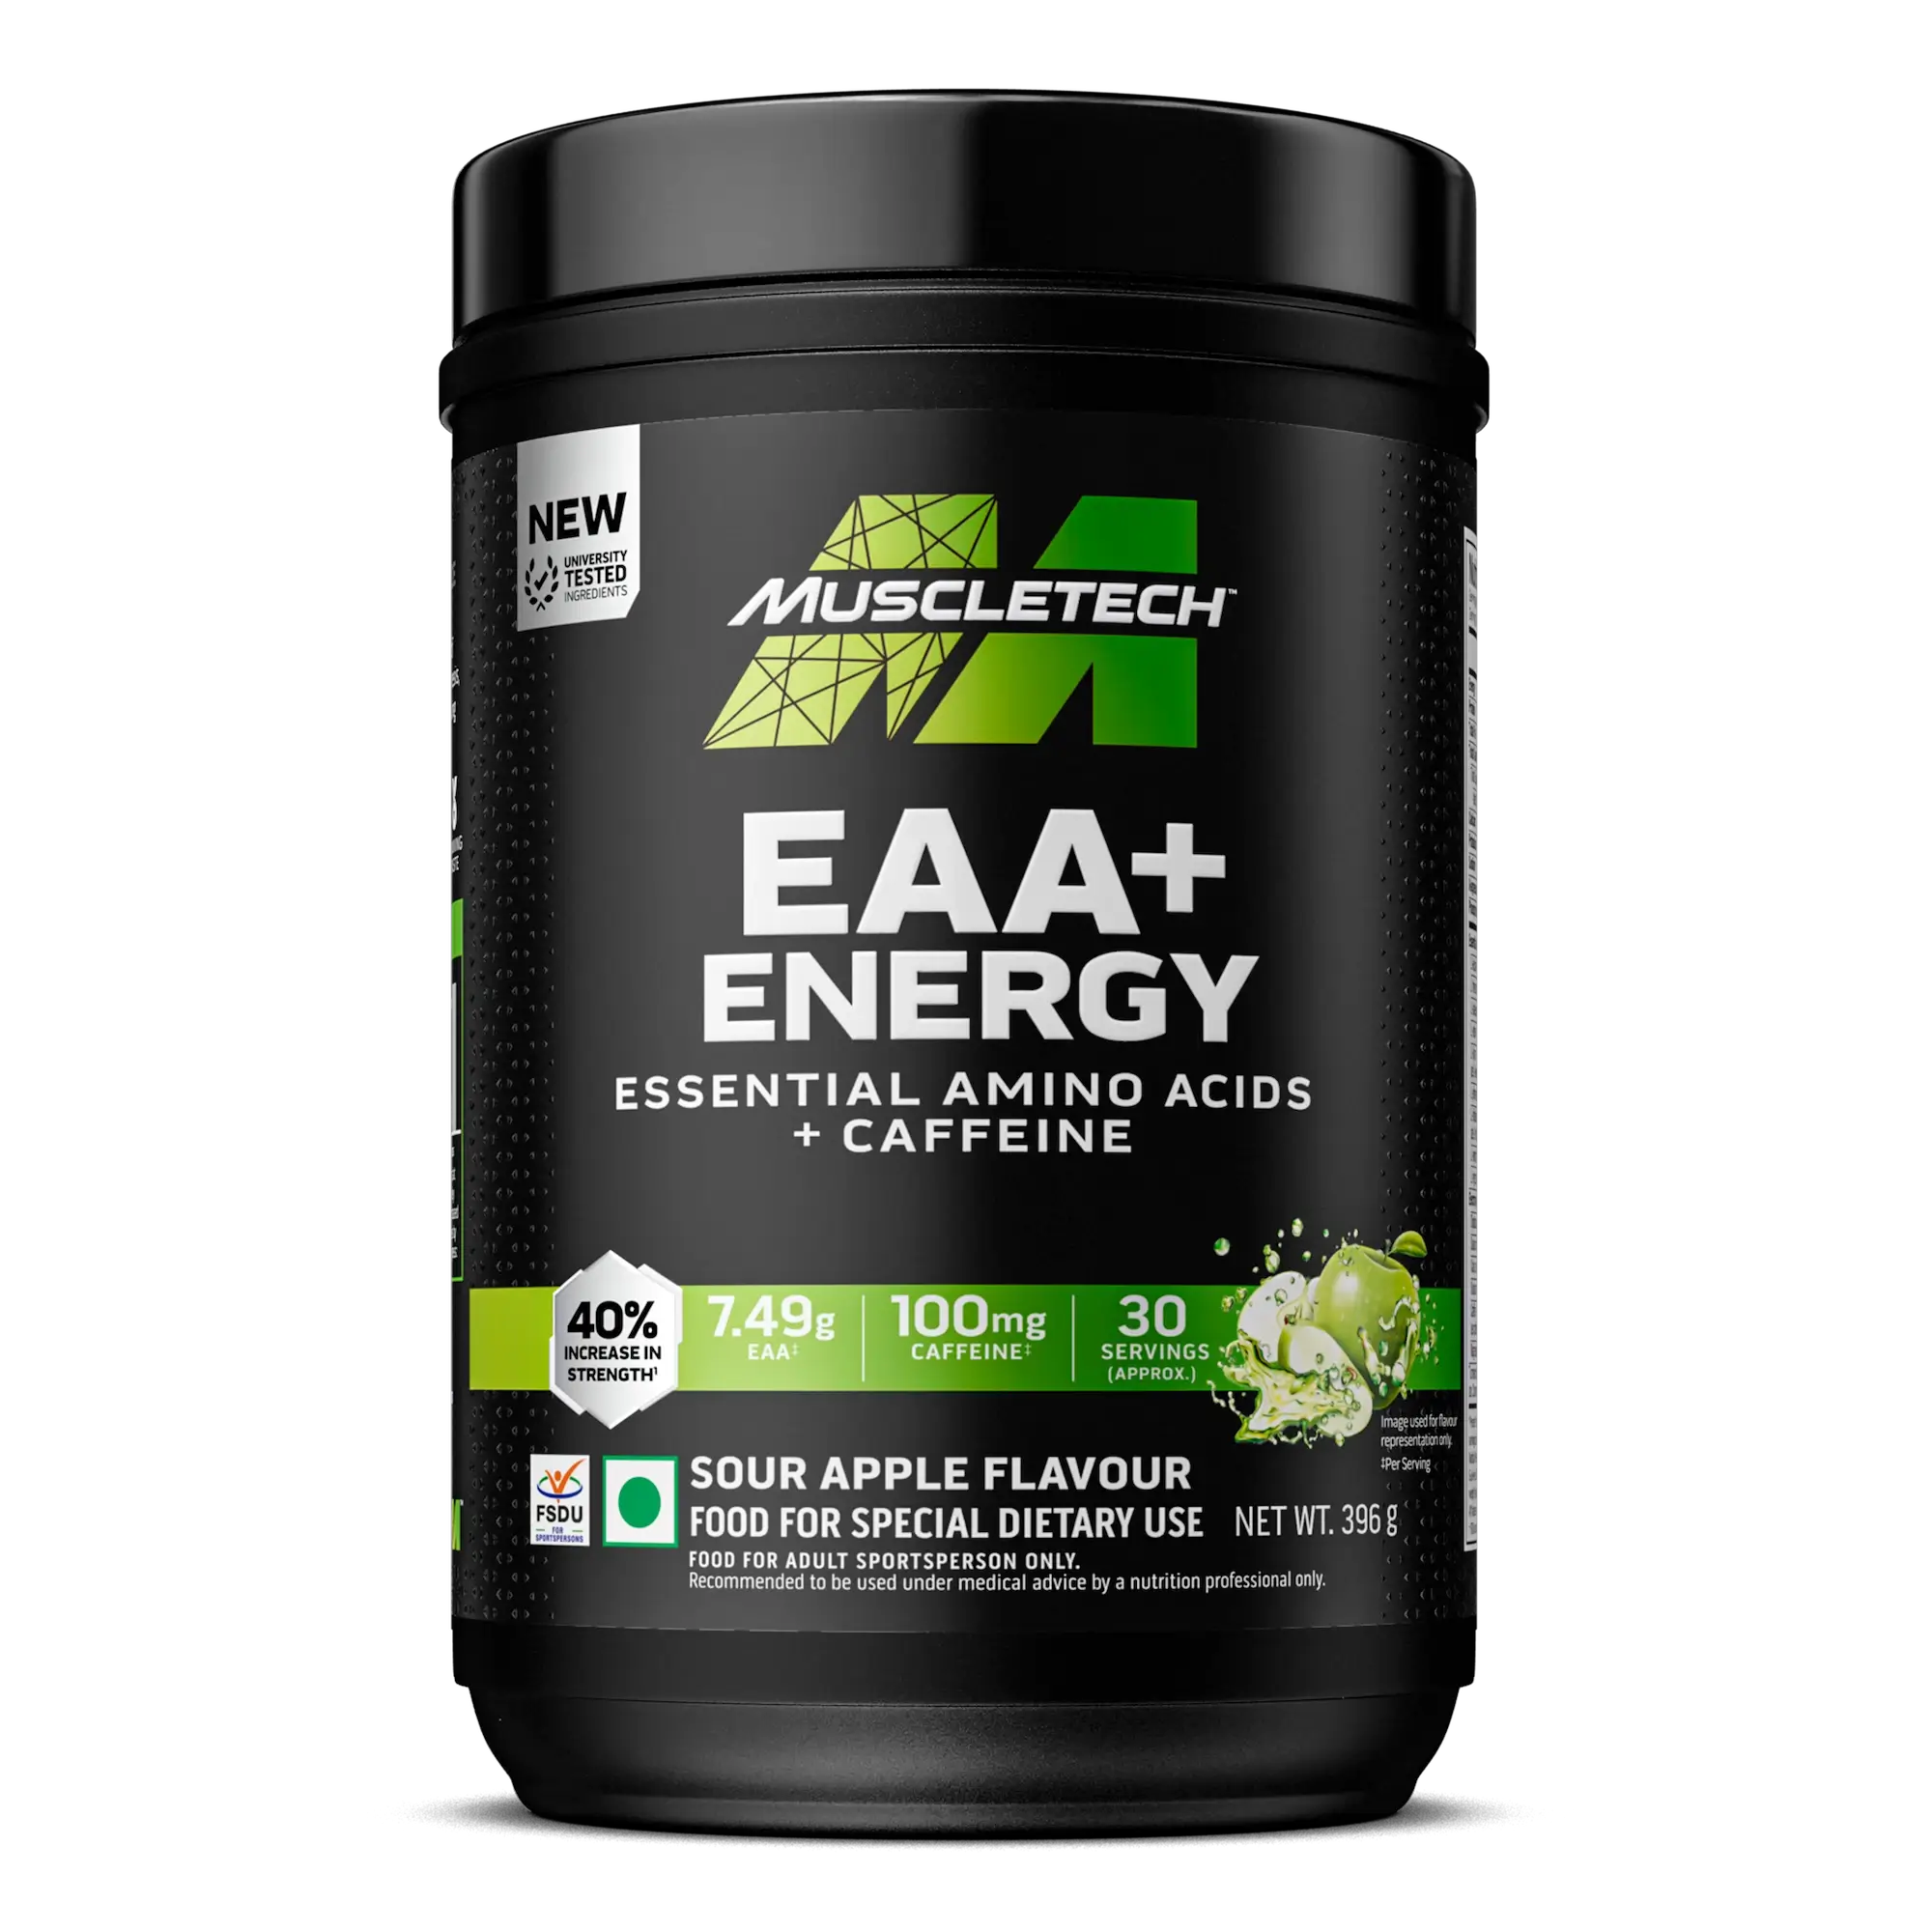 MUSCLETECH EAA+ ENERGY AMINO ACID, MUSCLE BUILDING, RECOVERY